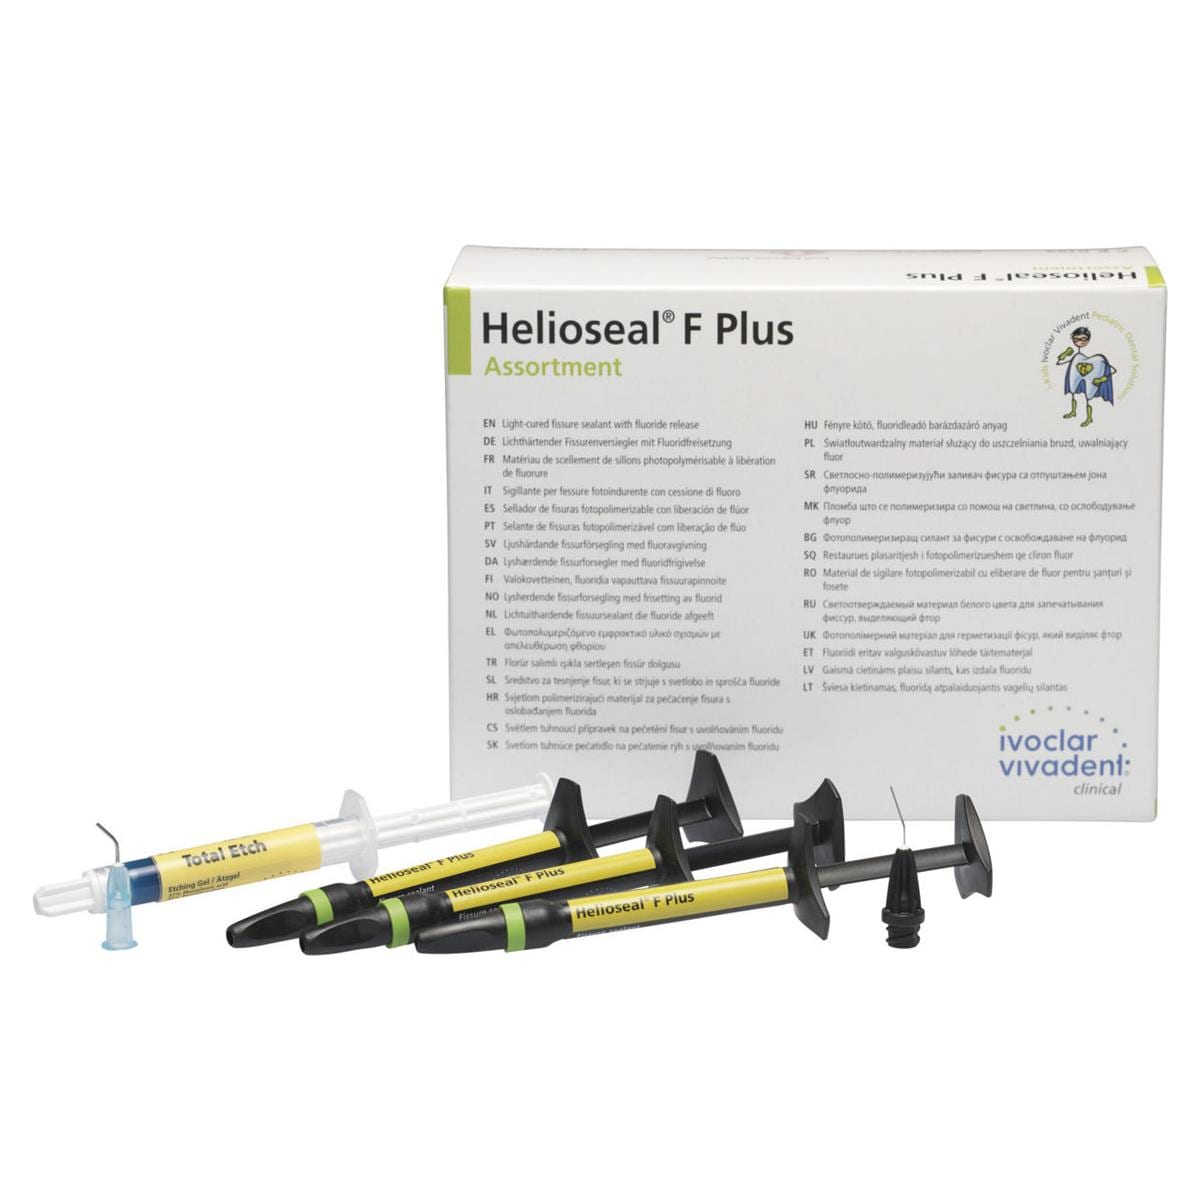 Helioseal F Plus - assortiment - Complete set